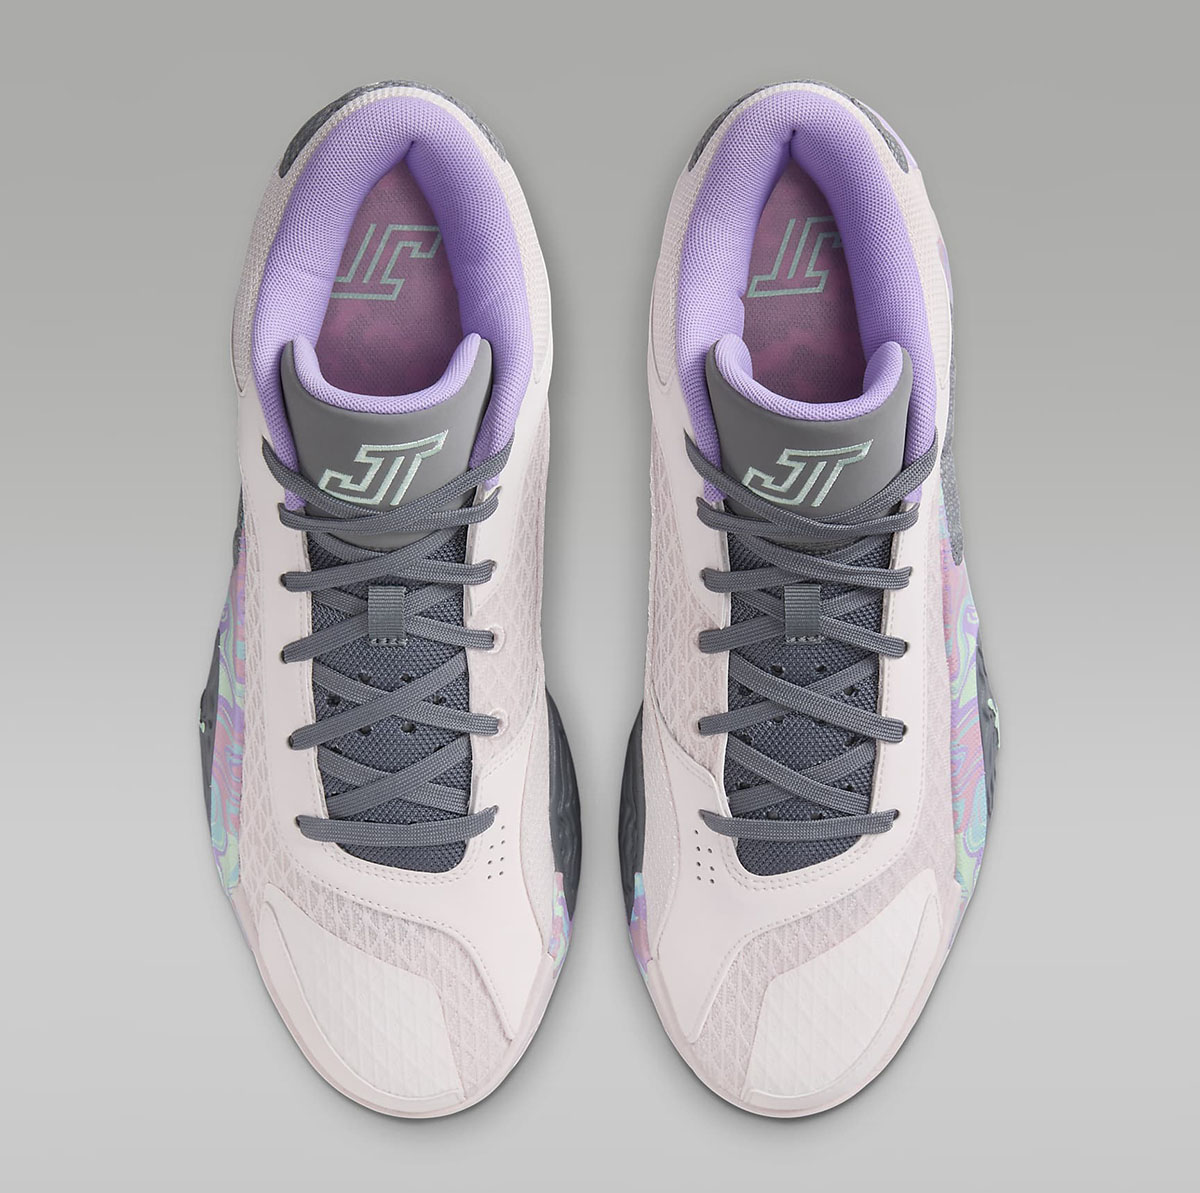 The flexible outsole of The Jordan Air Zoom 85 Runner Sidewalk Chalk Shoes 4